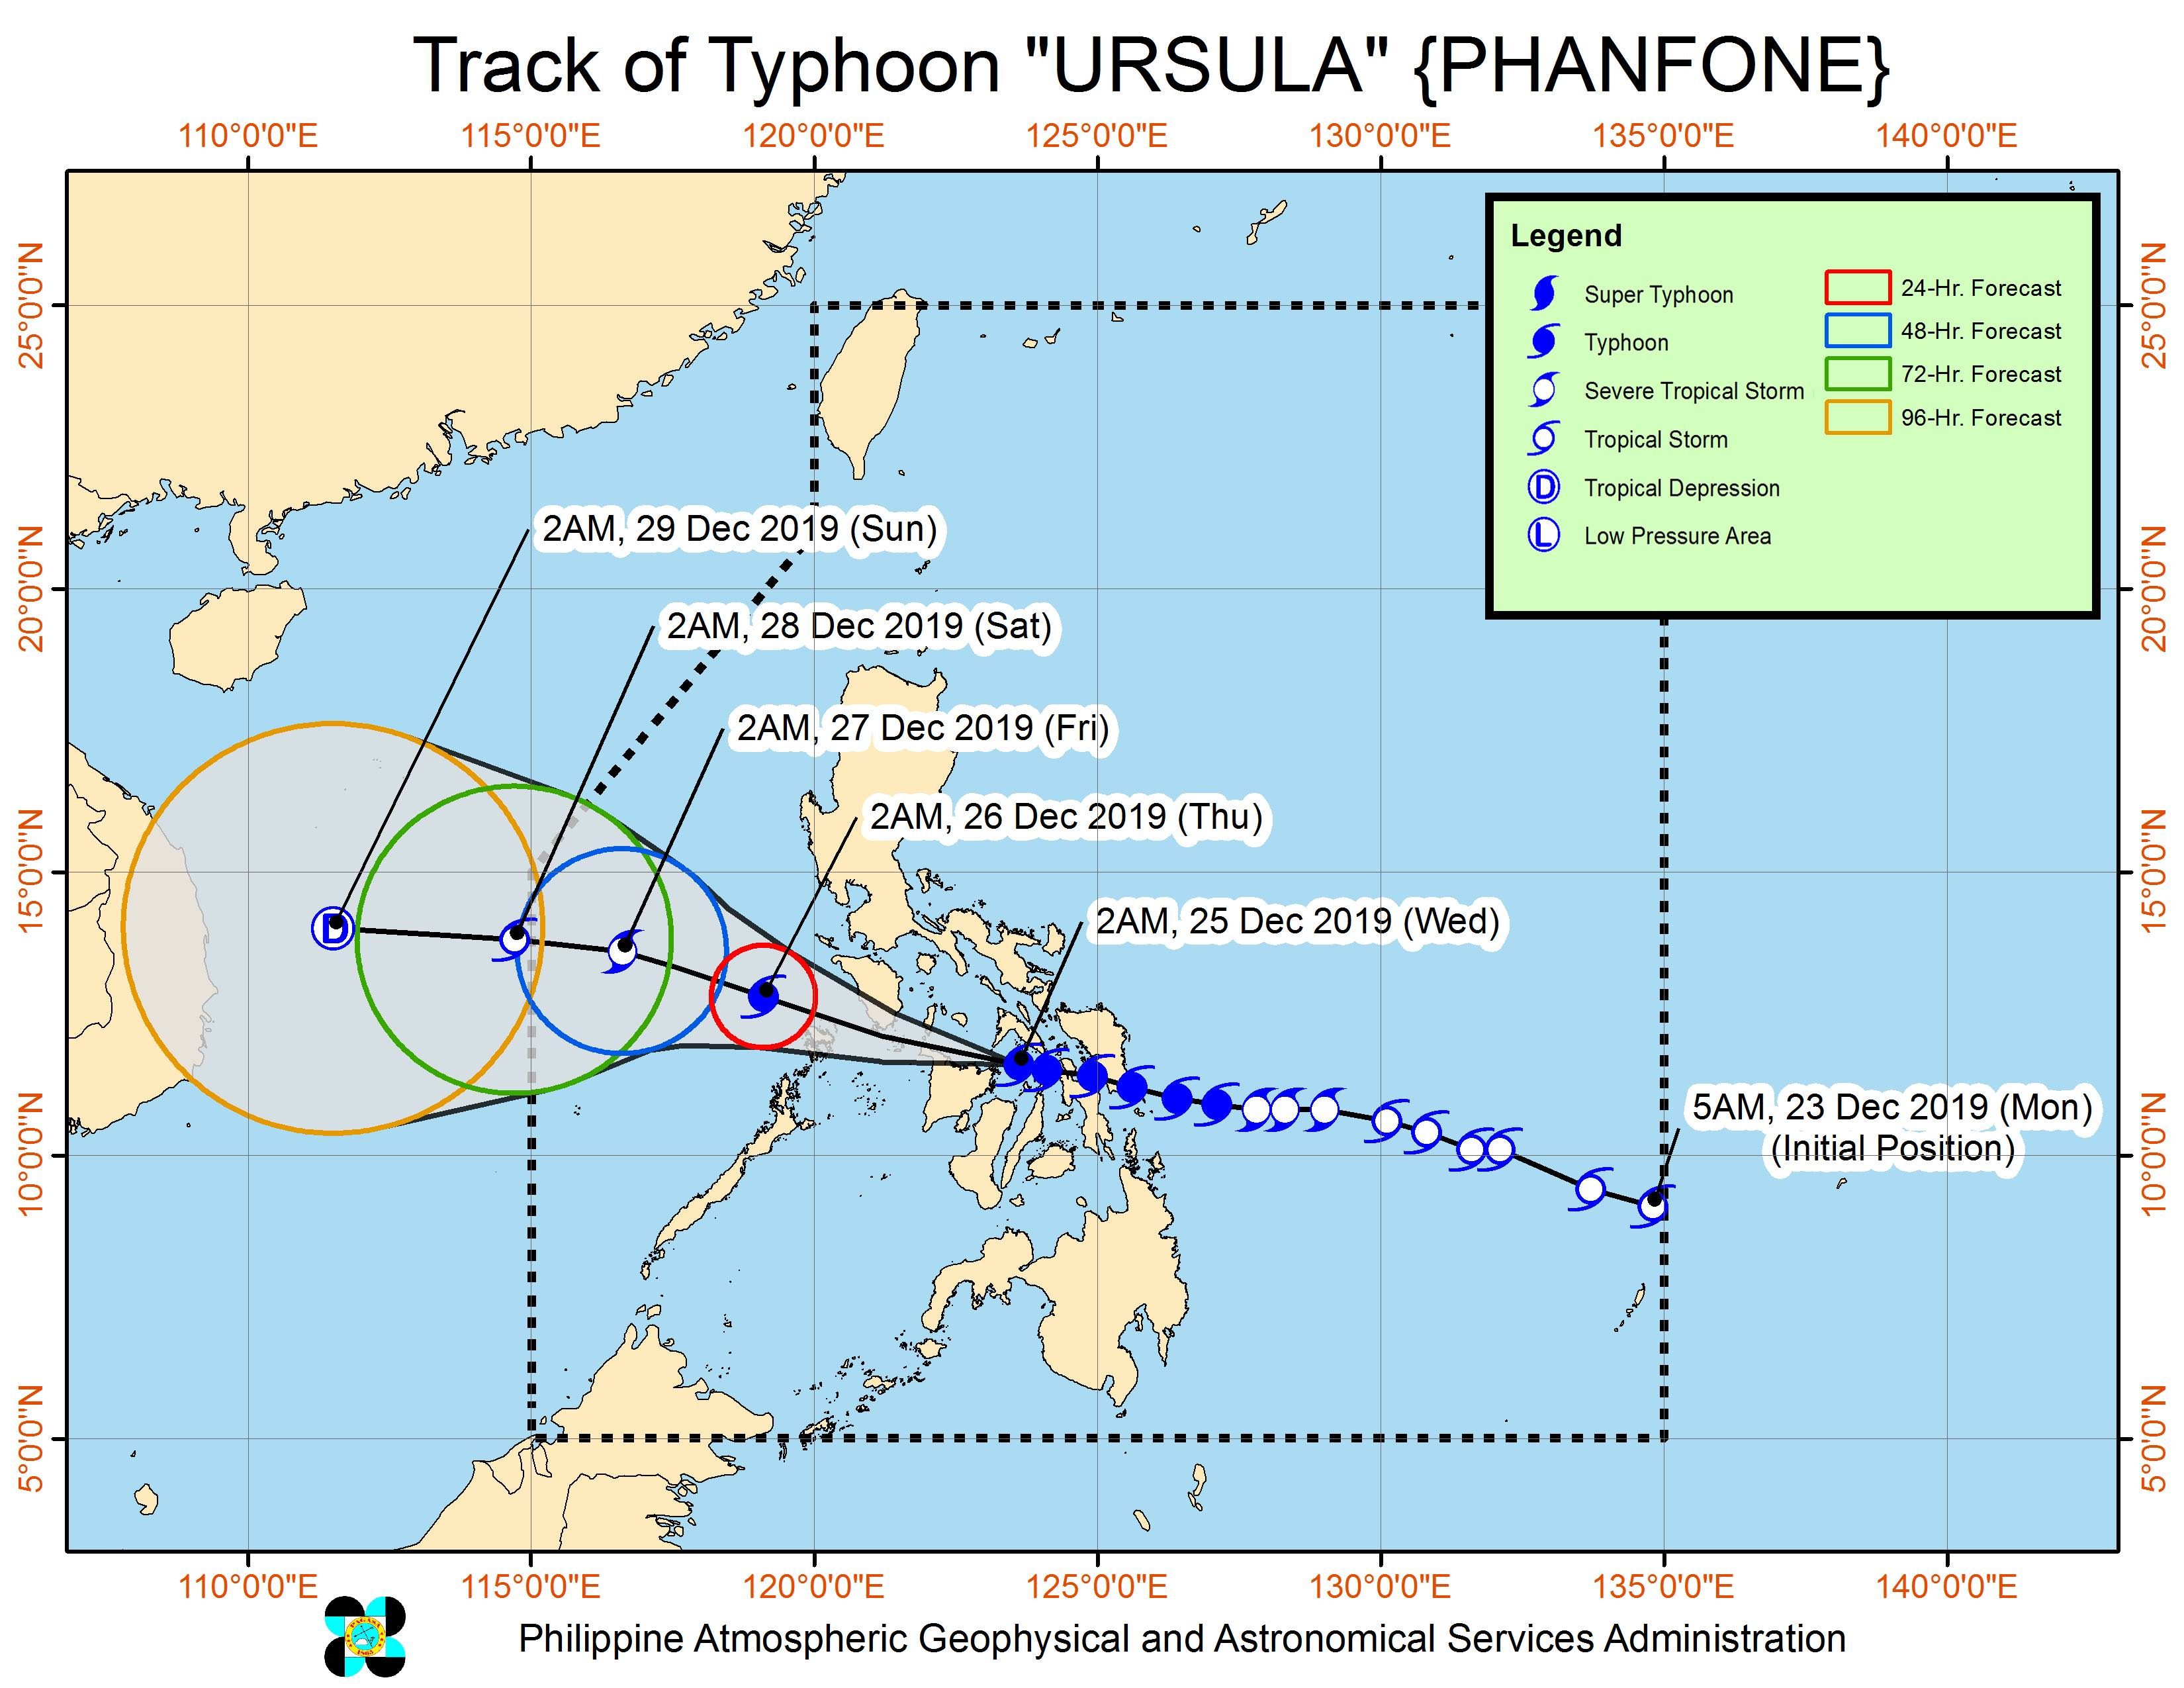 Forecast track of Typhoon Ursula (Phanfone) as of December 25, 2019, 5 am. Image from PAGASA 